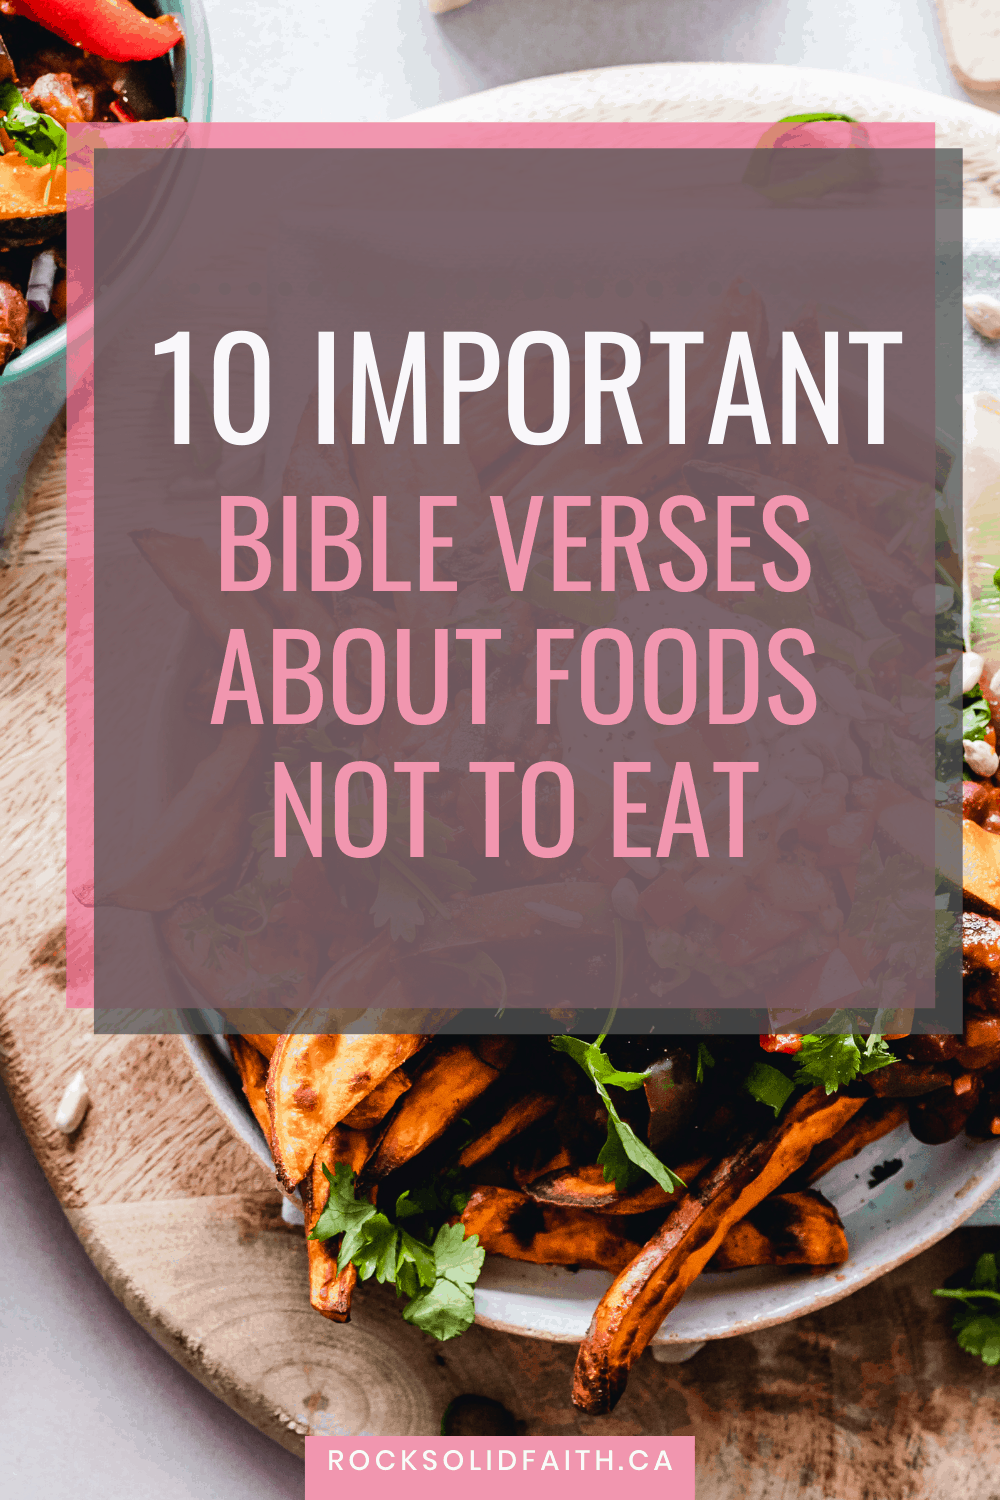 10 Important Bible Verses About Food Not To Eat